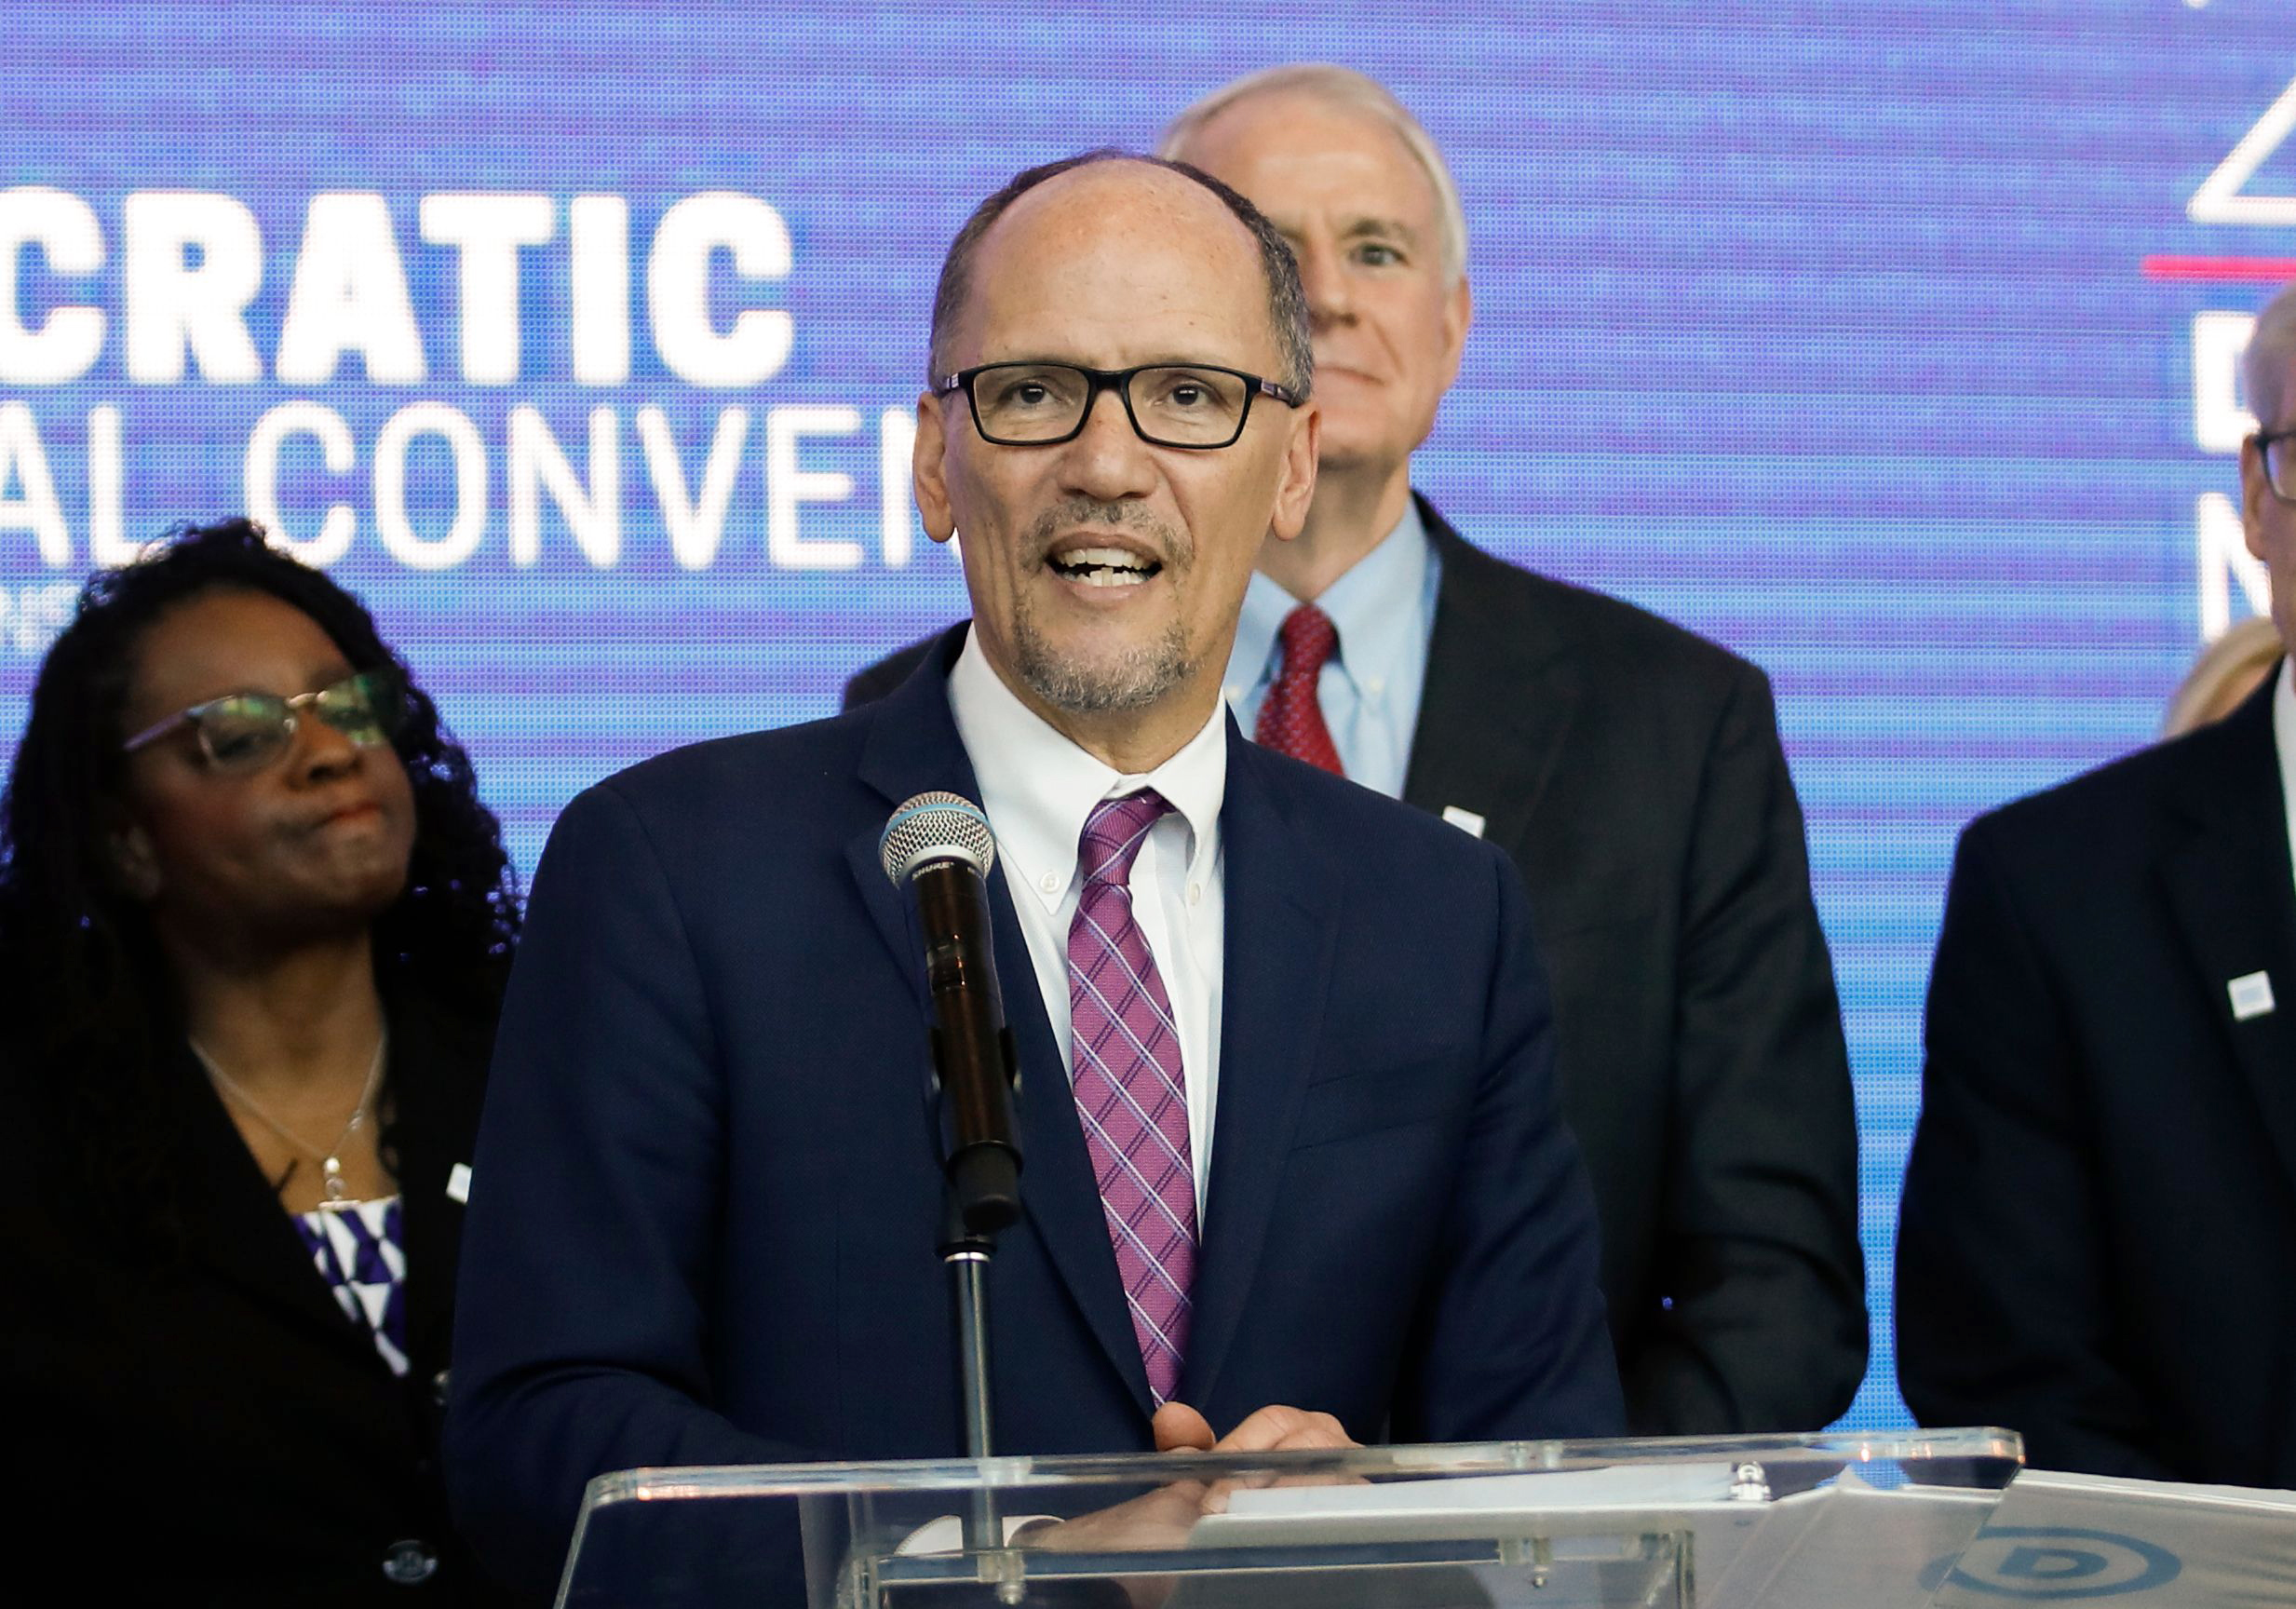 PHOTO: Chair of the Democratic National Committee Tom Perez speaks during a press conference at the Fiserv Forum in Milwaukee, Wisconsin, March 11, 2019, to announce the selection of Milwaukee as the 2020 Democratic National Convention host city.